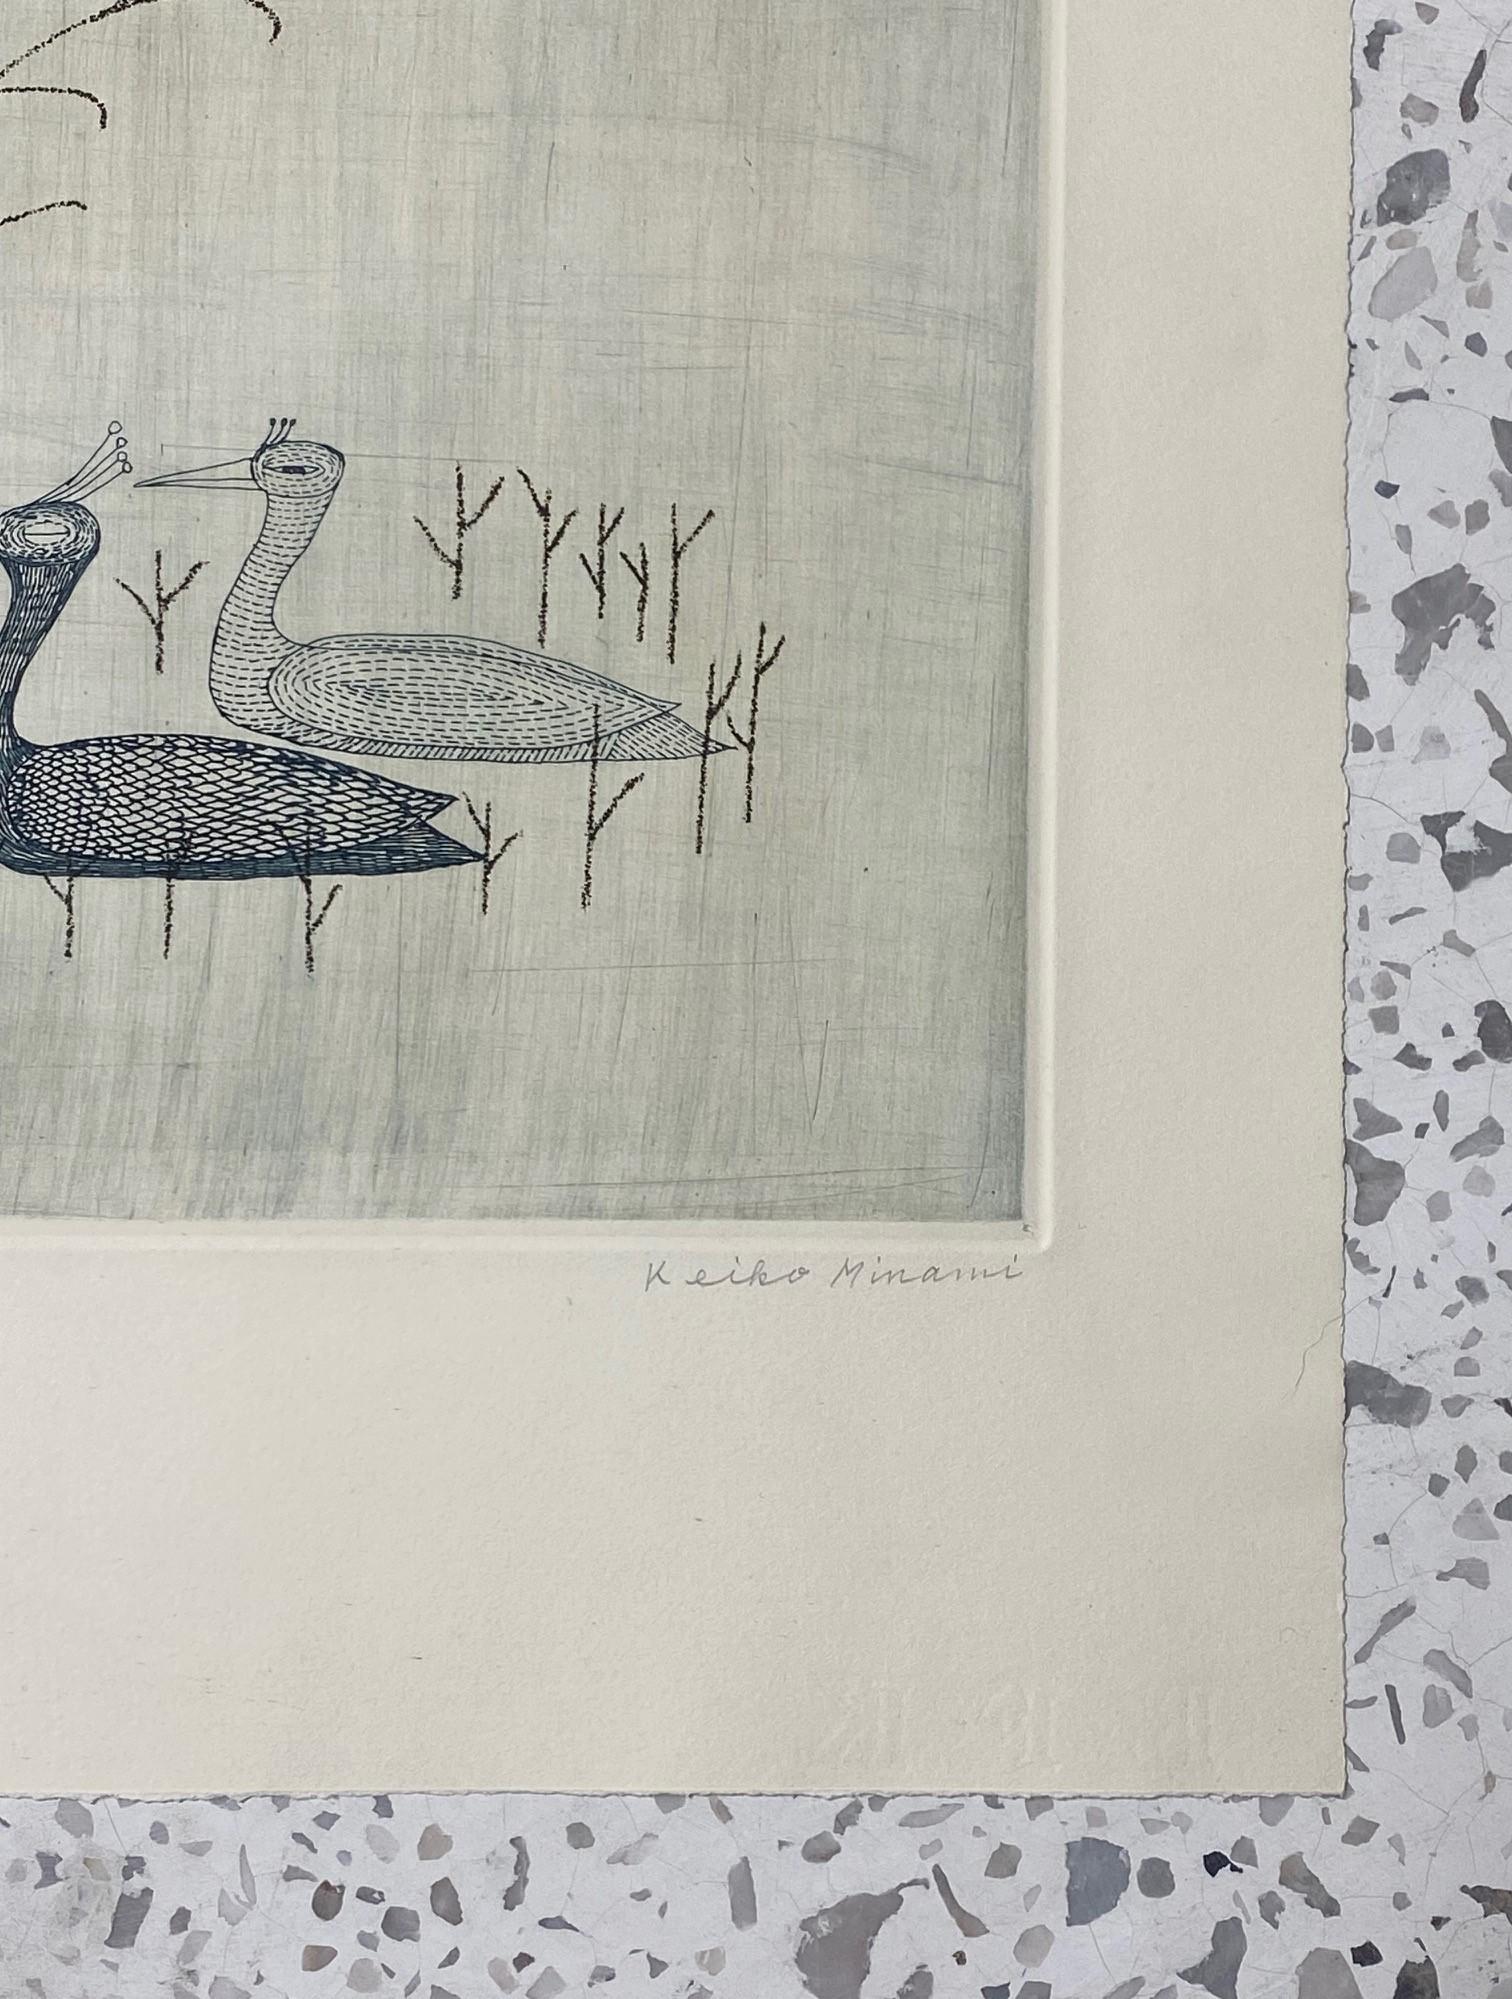 Keiko Minami Signed Large Limited Edition Japanese Etching Print Birds and Reeds For Sale 1